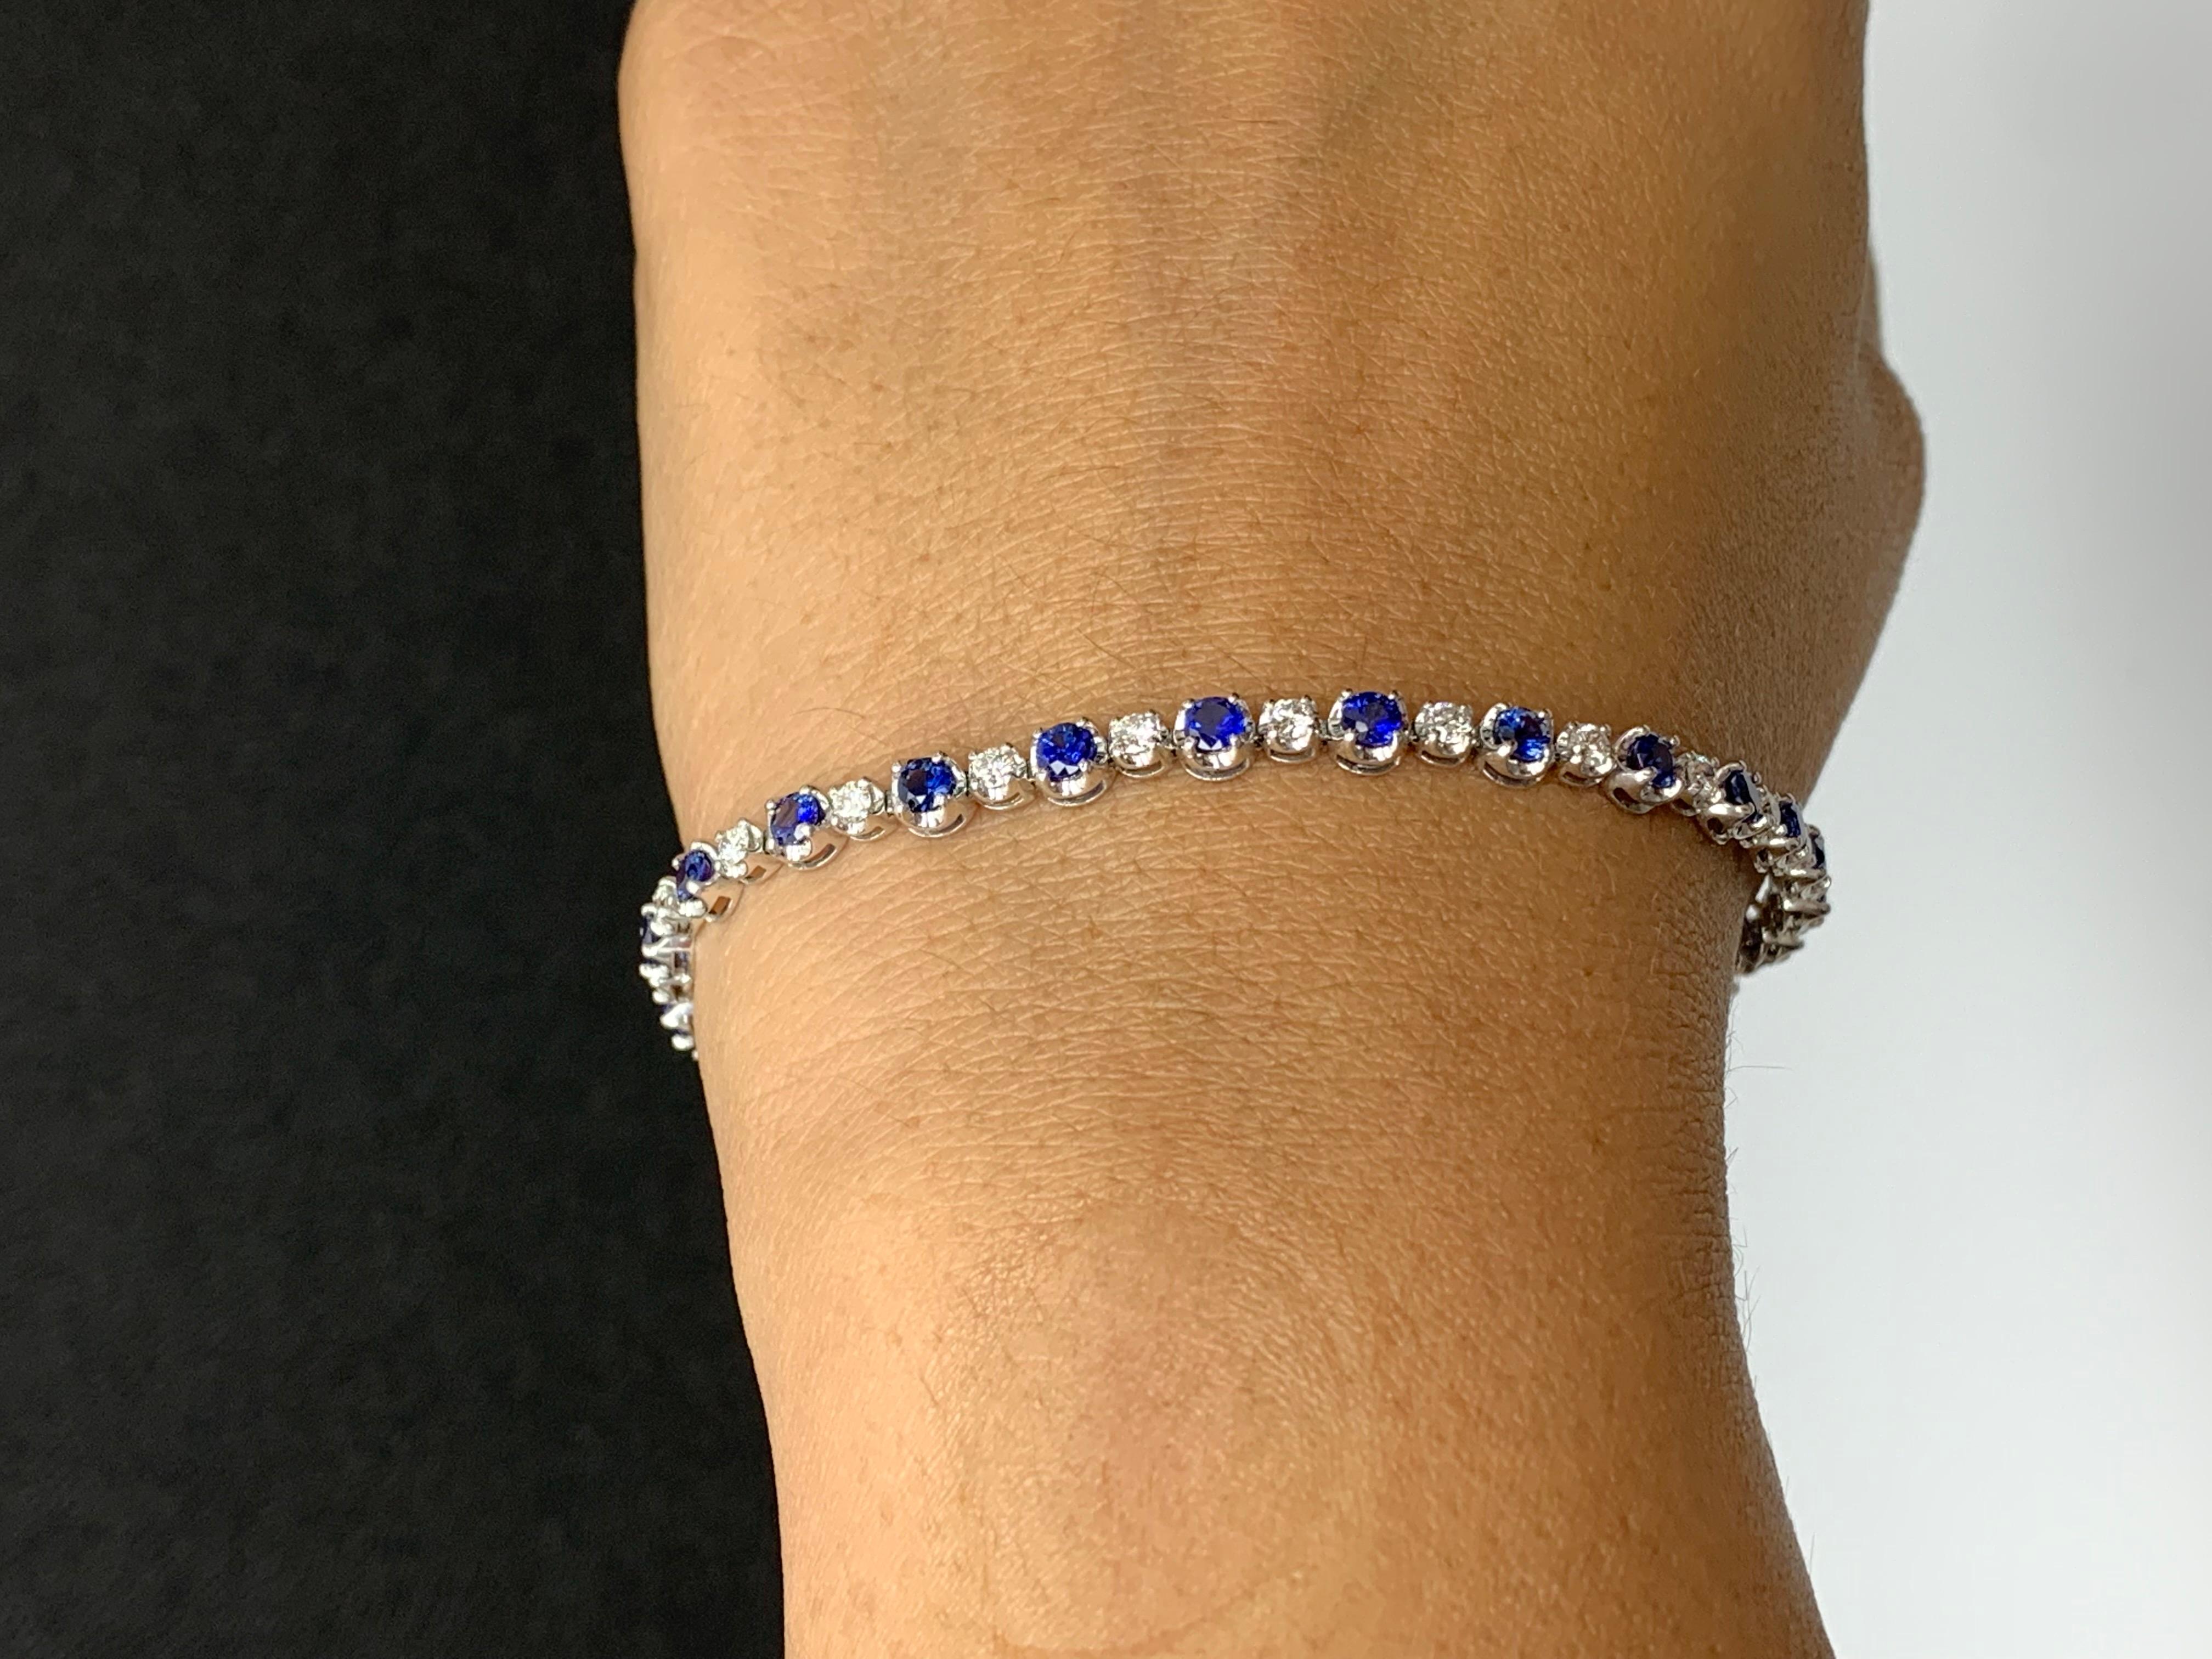 A stunning bracelet set with 23 Vibrant Blue Sapphires weighing 2.96 carats total. Alternating these blue sapphires are 25 sparkling round diamonds weighing 1.15 carats in total. Set in polished 14k white gold. Double lock mechanism for maximum